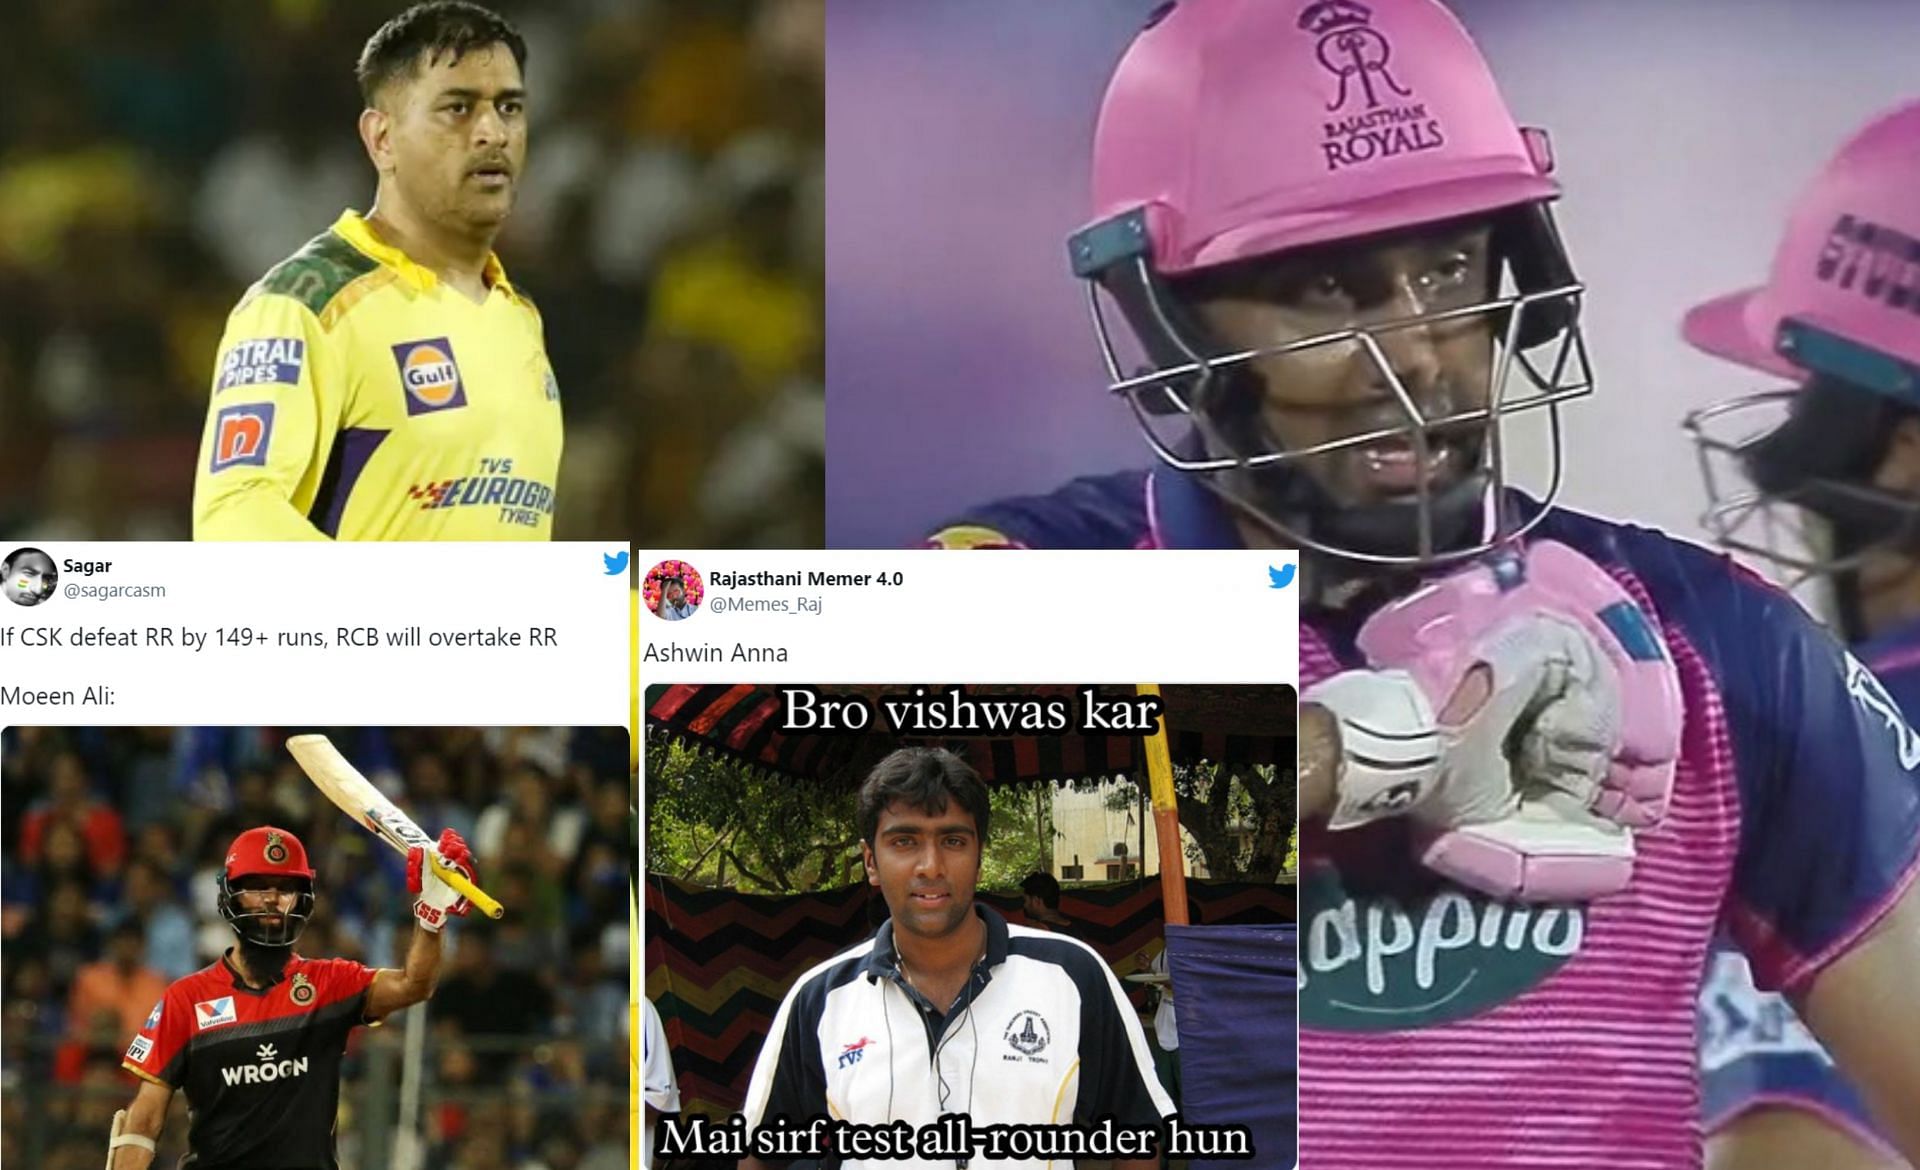 CSK vs RR memes, IPL 2022: Top 10 funny memes from the latest match